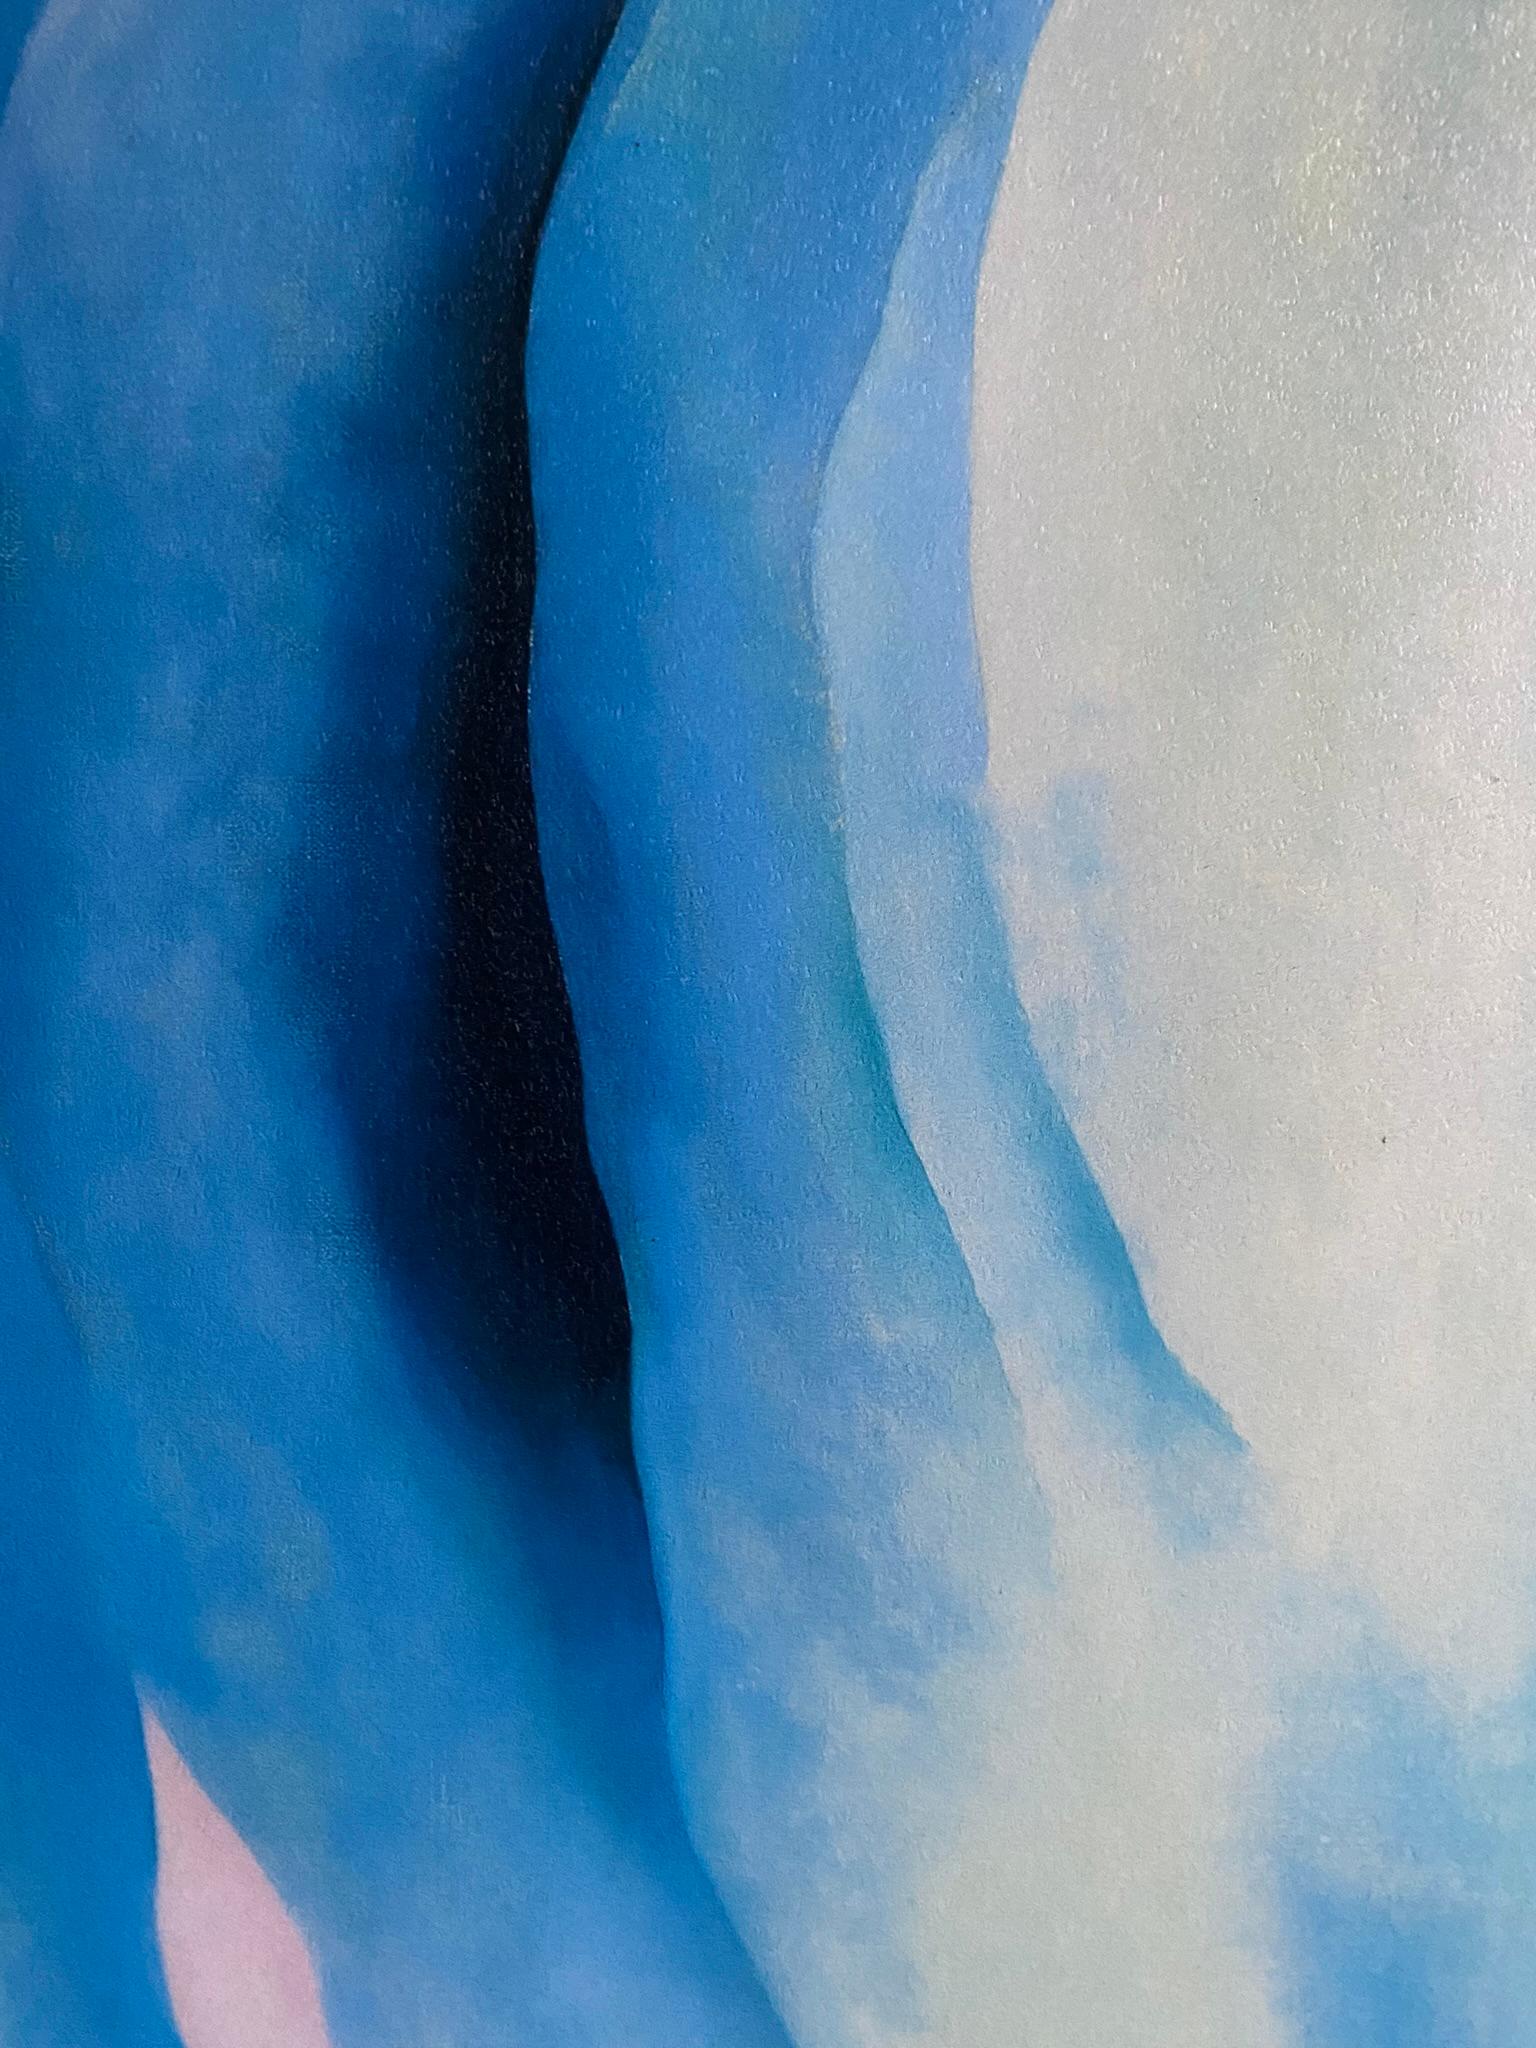 Georgia O'Keeffe-High Quality print by MoMA circa1997-Abstraction Blue-GSYStudio For Sale 14